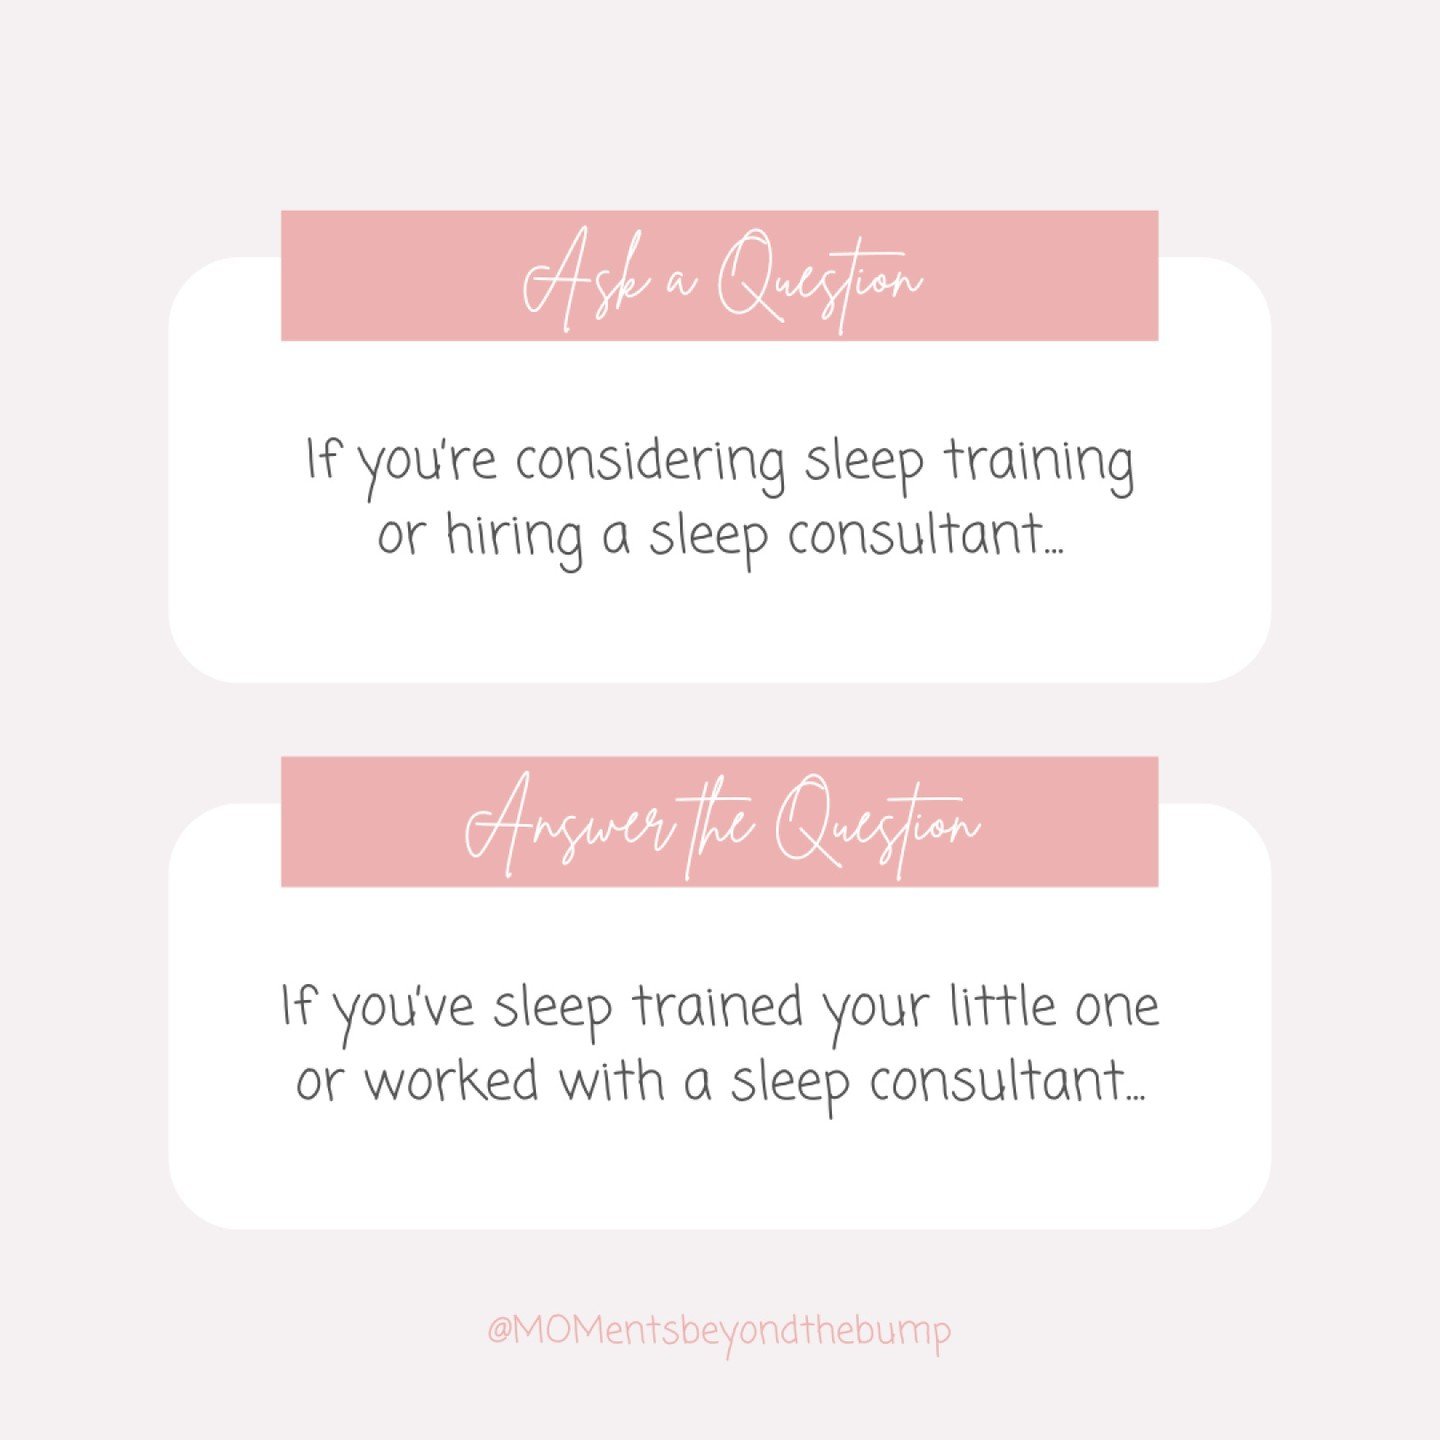 Jumping on this trend! Can't wait to see mama's supporting each other right here in this thread!! 

If you've got questions about sleep training or working with a sleep consultant, drop them below! 👇🏼

And those who have sleep trained or hired a sl